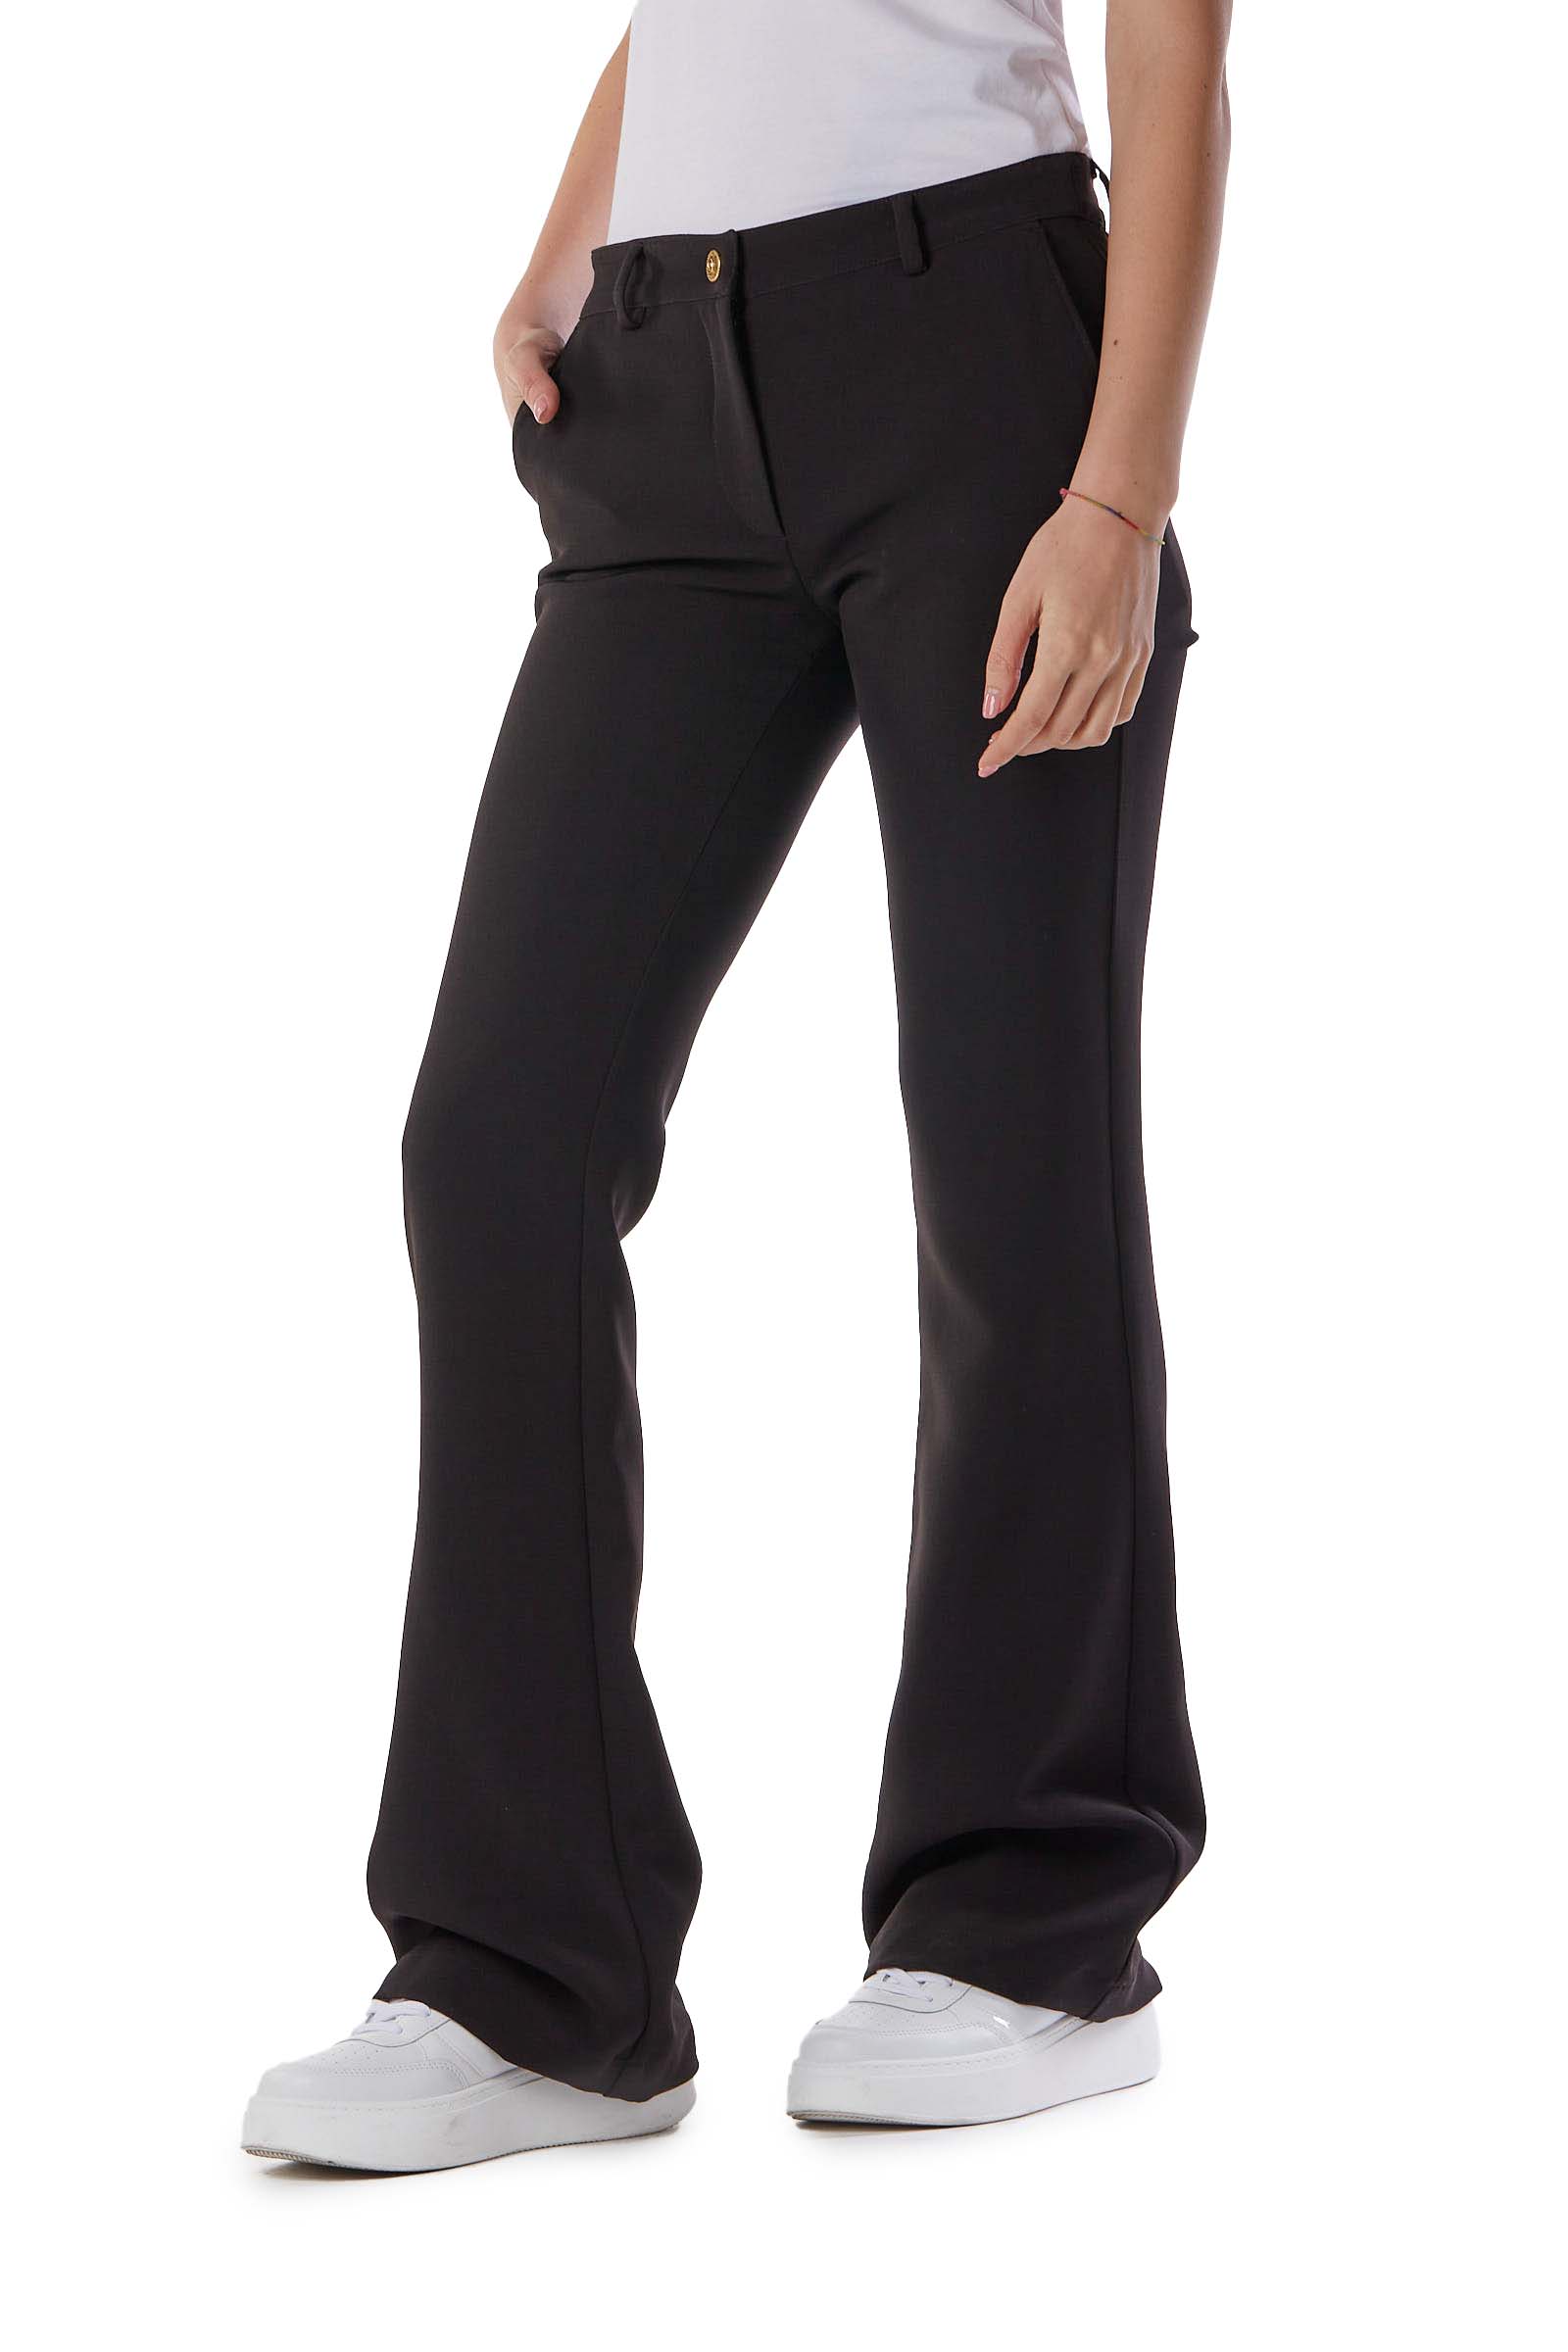 VERSACE JEANS COUTURE PANTALONI 73HAA105-N0103 DONNA